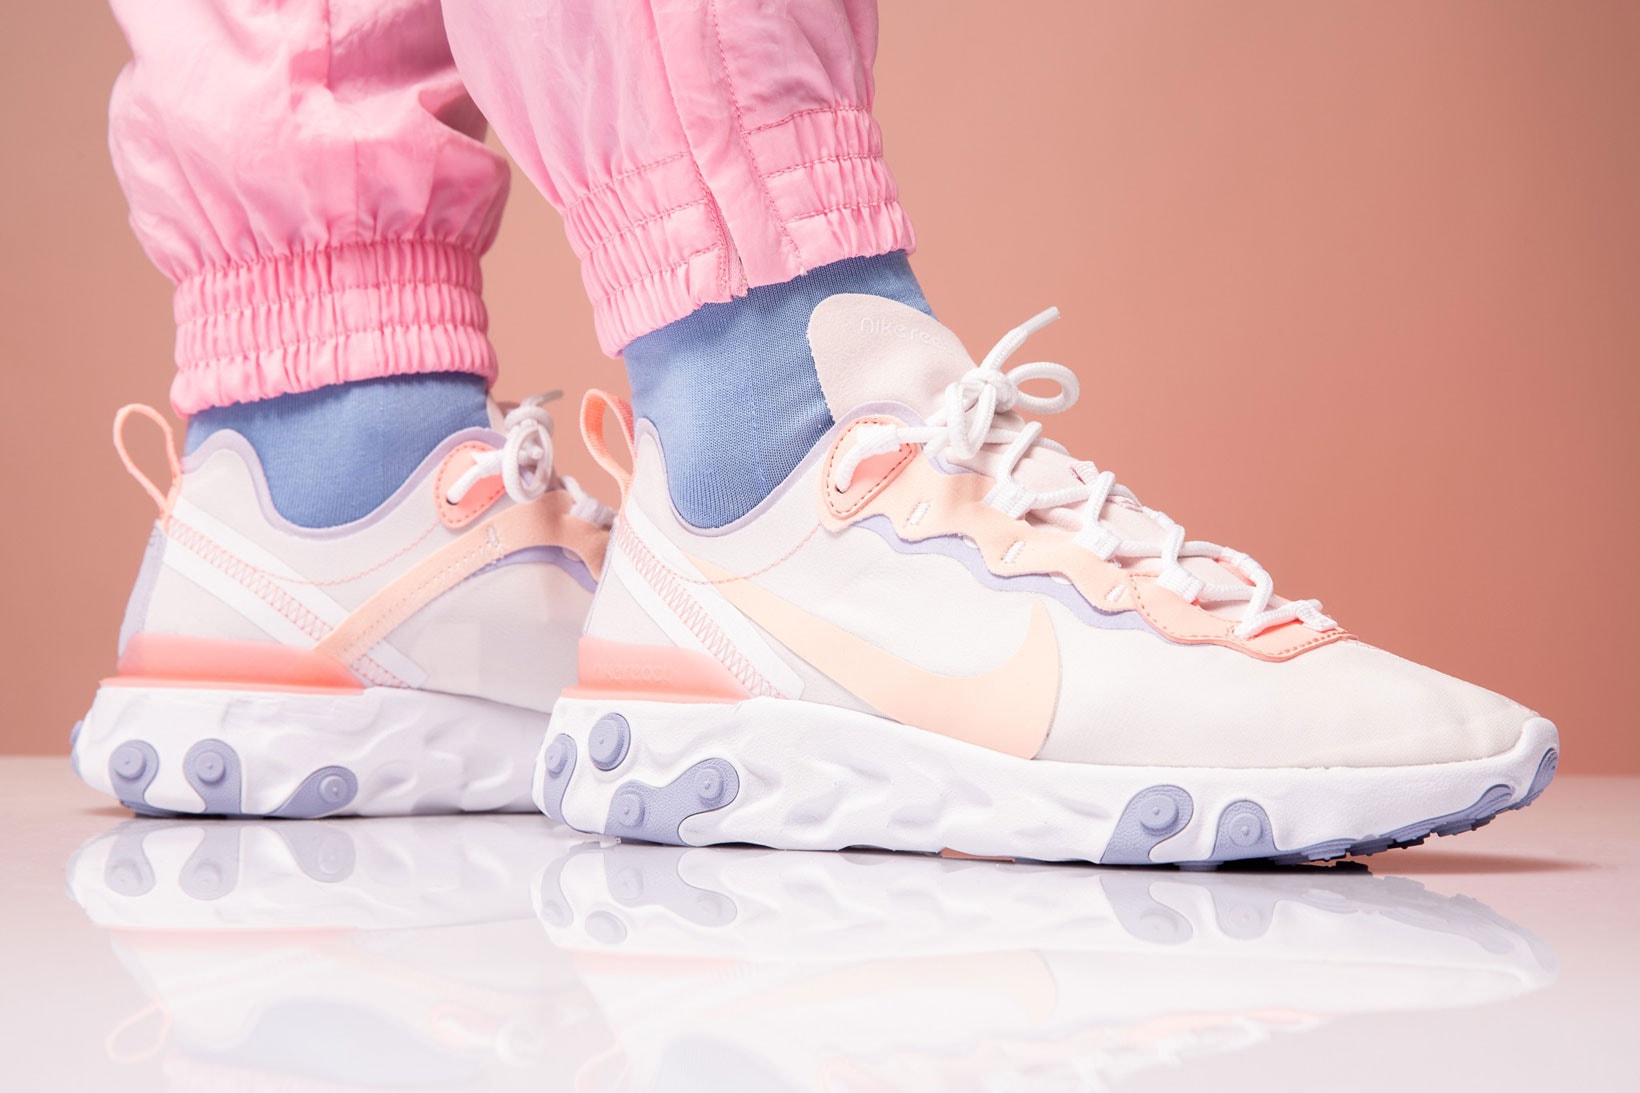 Nike React Element 55 Pale Pink Washed Coral